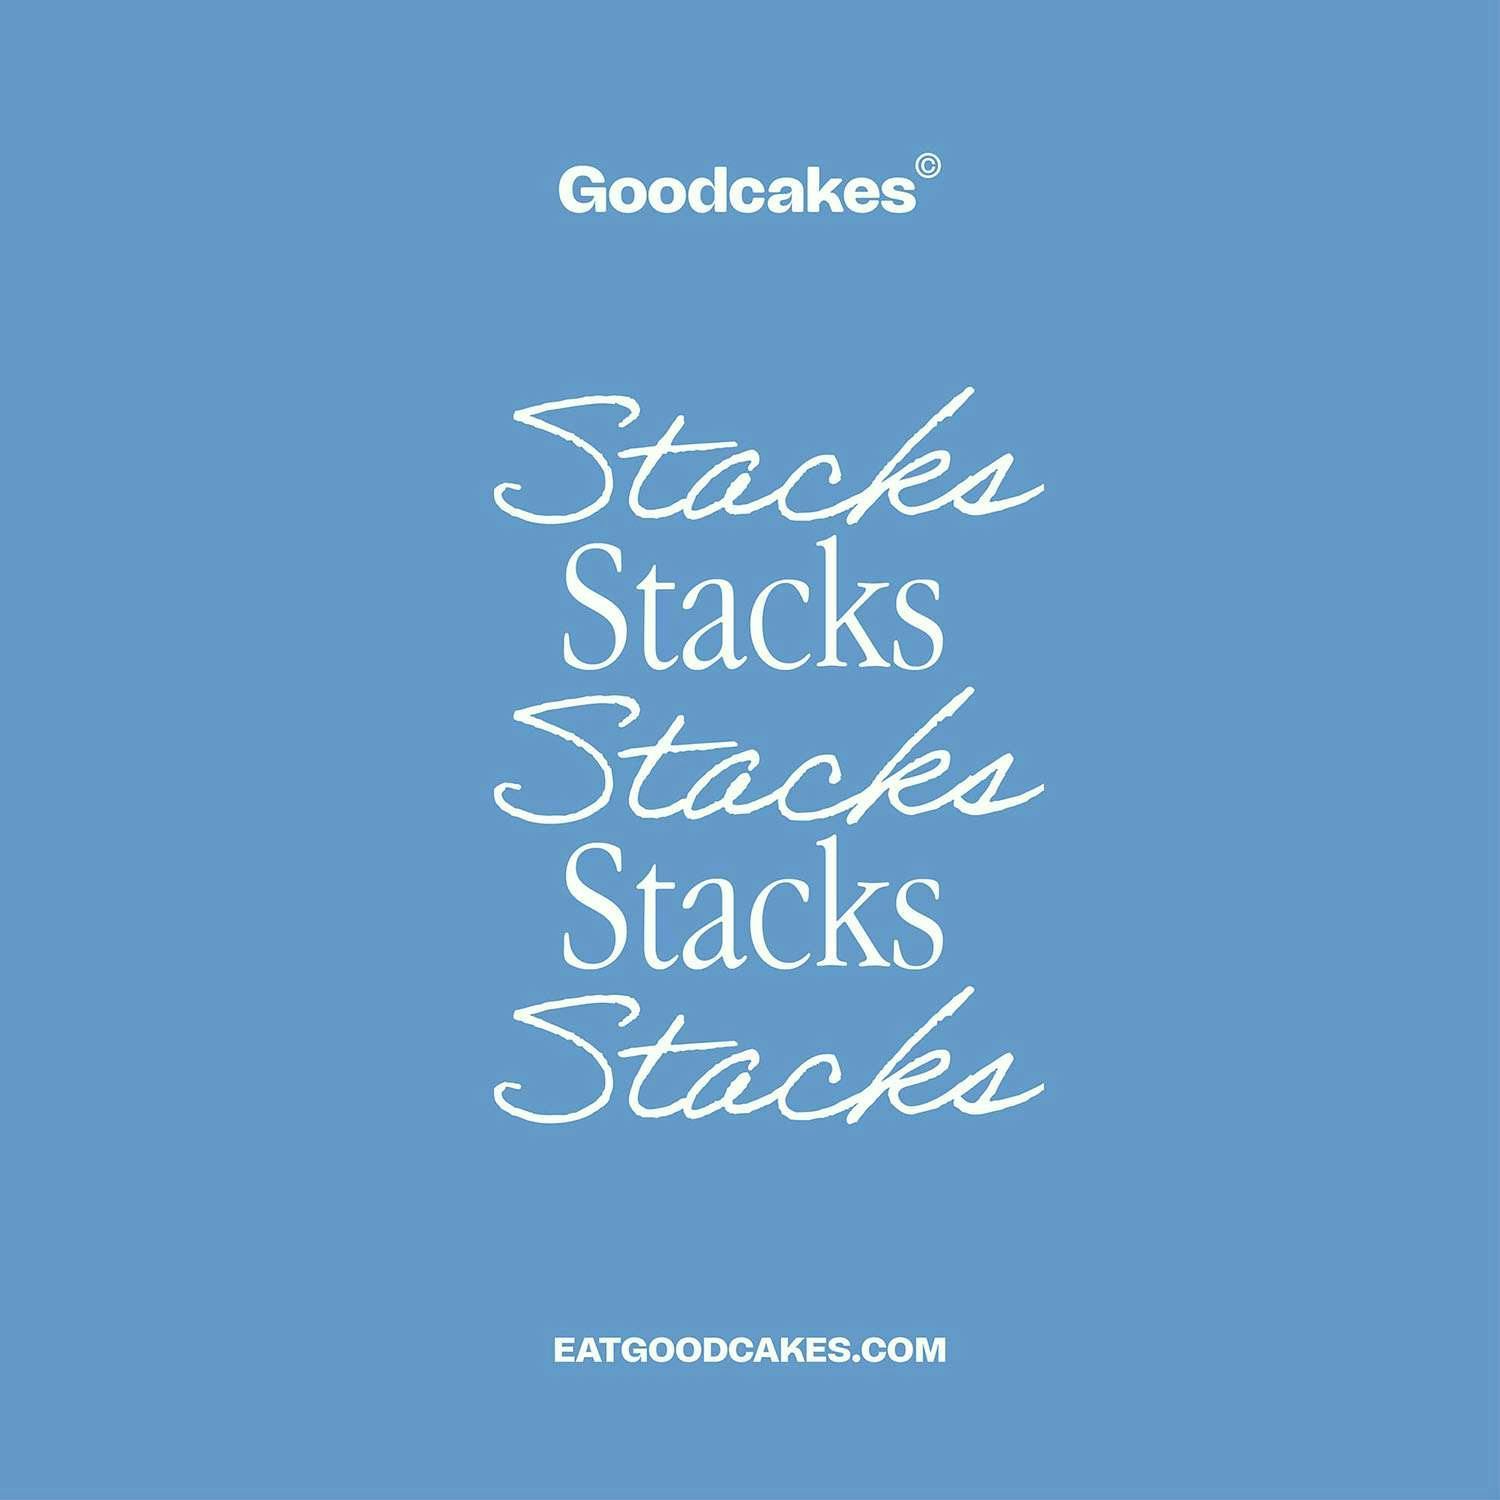 Goodcakes - Brand Identity, Packaging Design, 3D Rendering and Art Direction